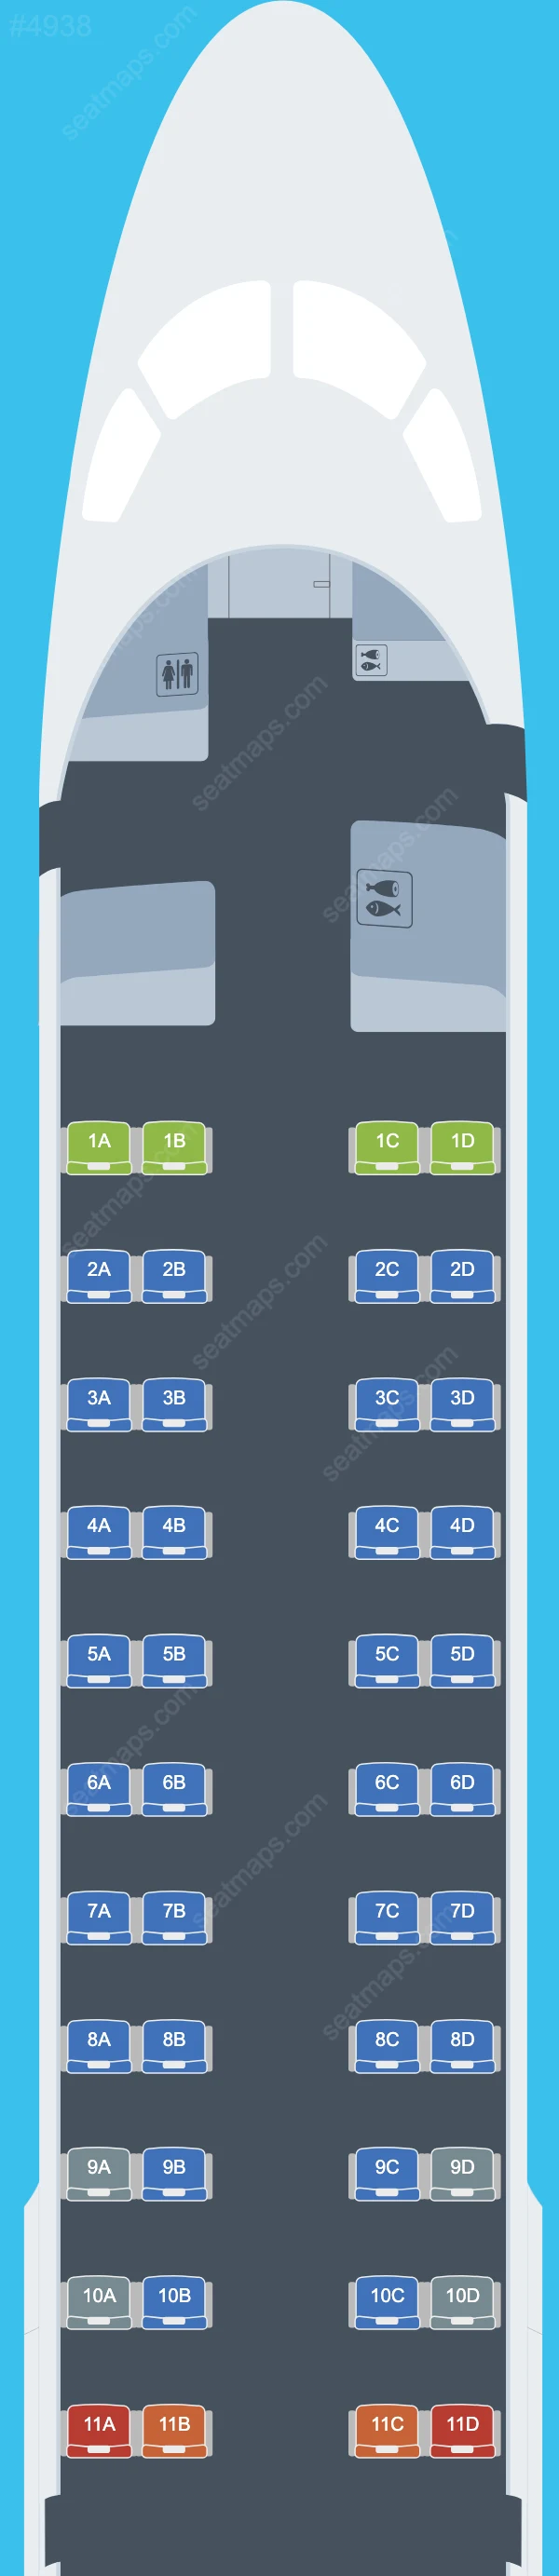 Mandarin Airlines Embraer E190 seatmap mobile preview